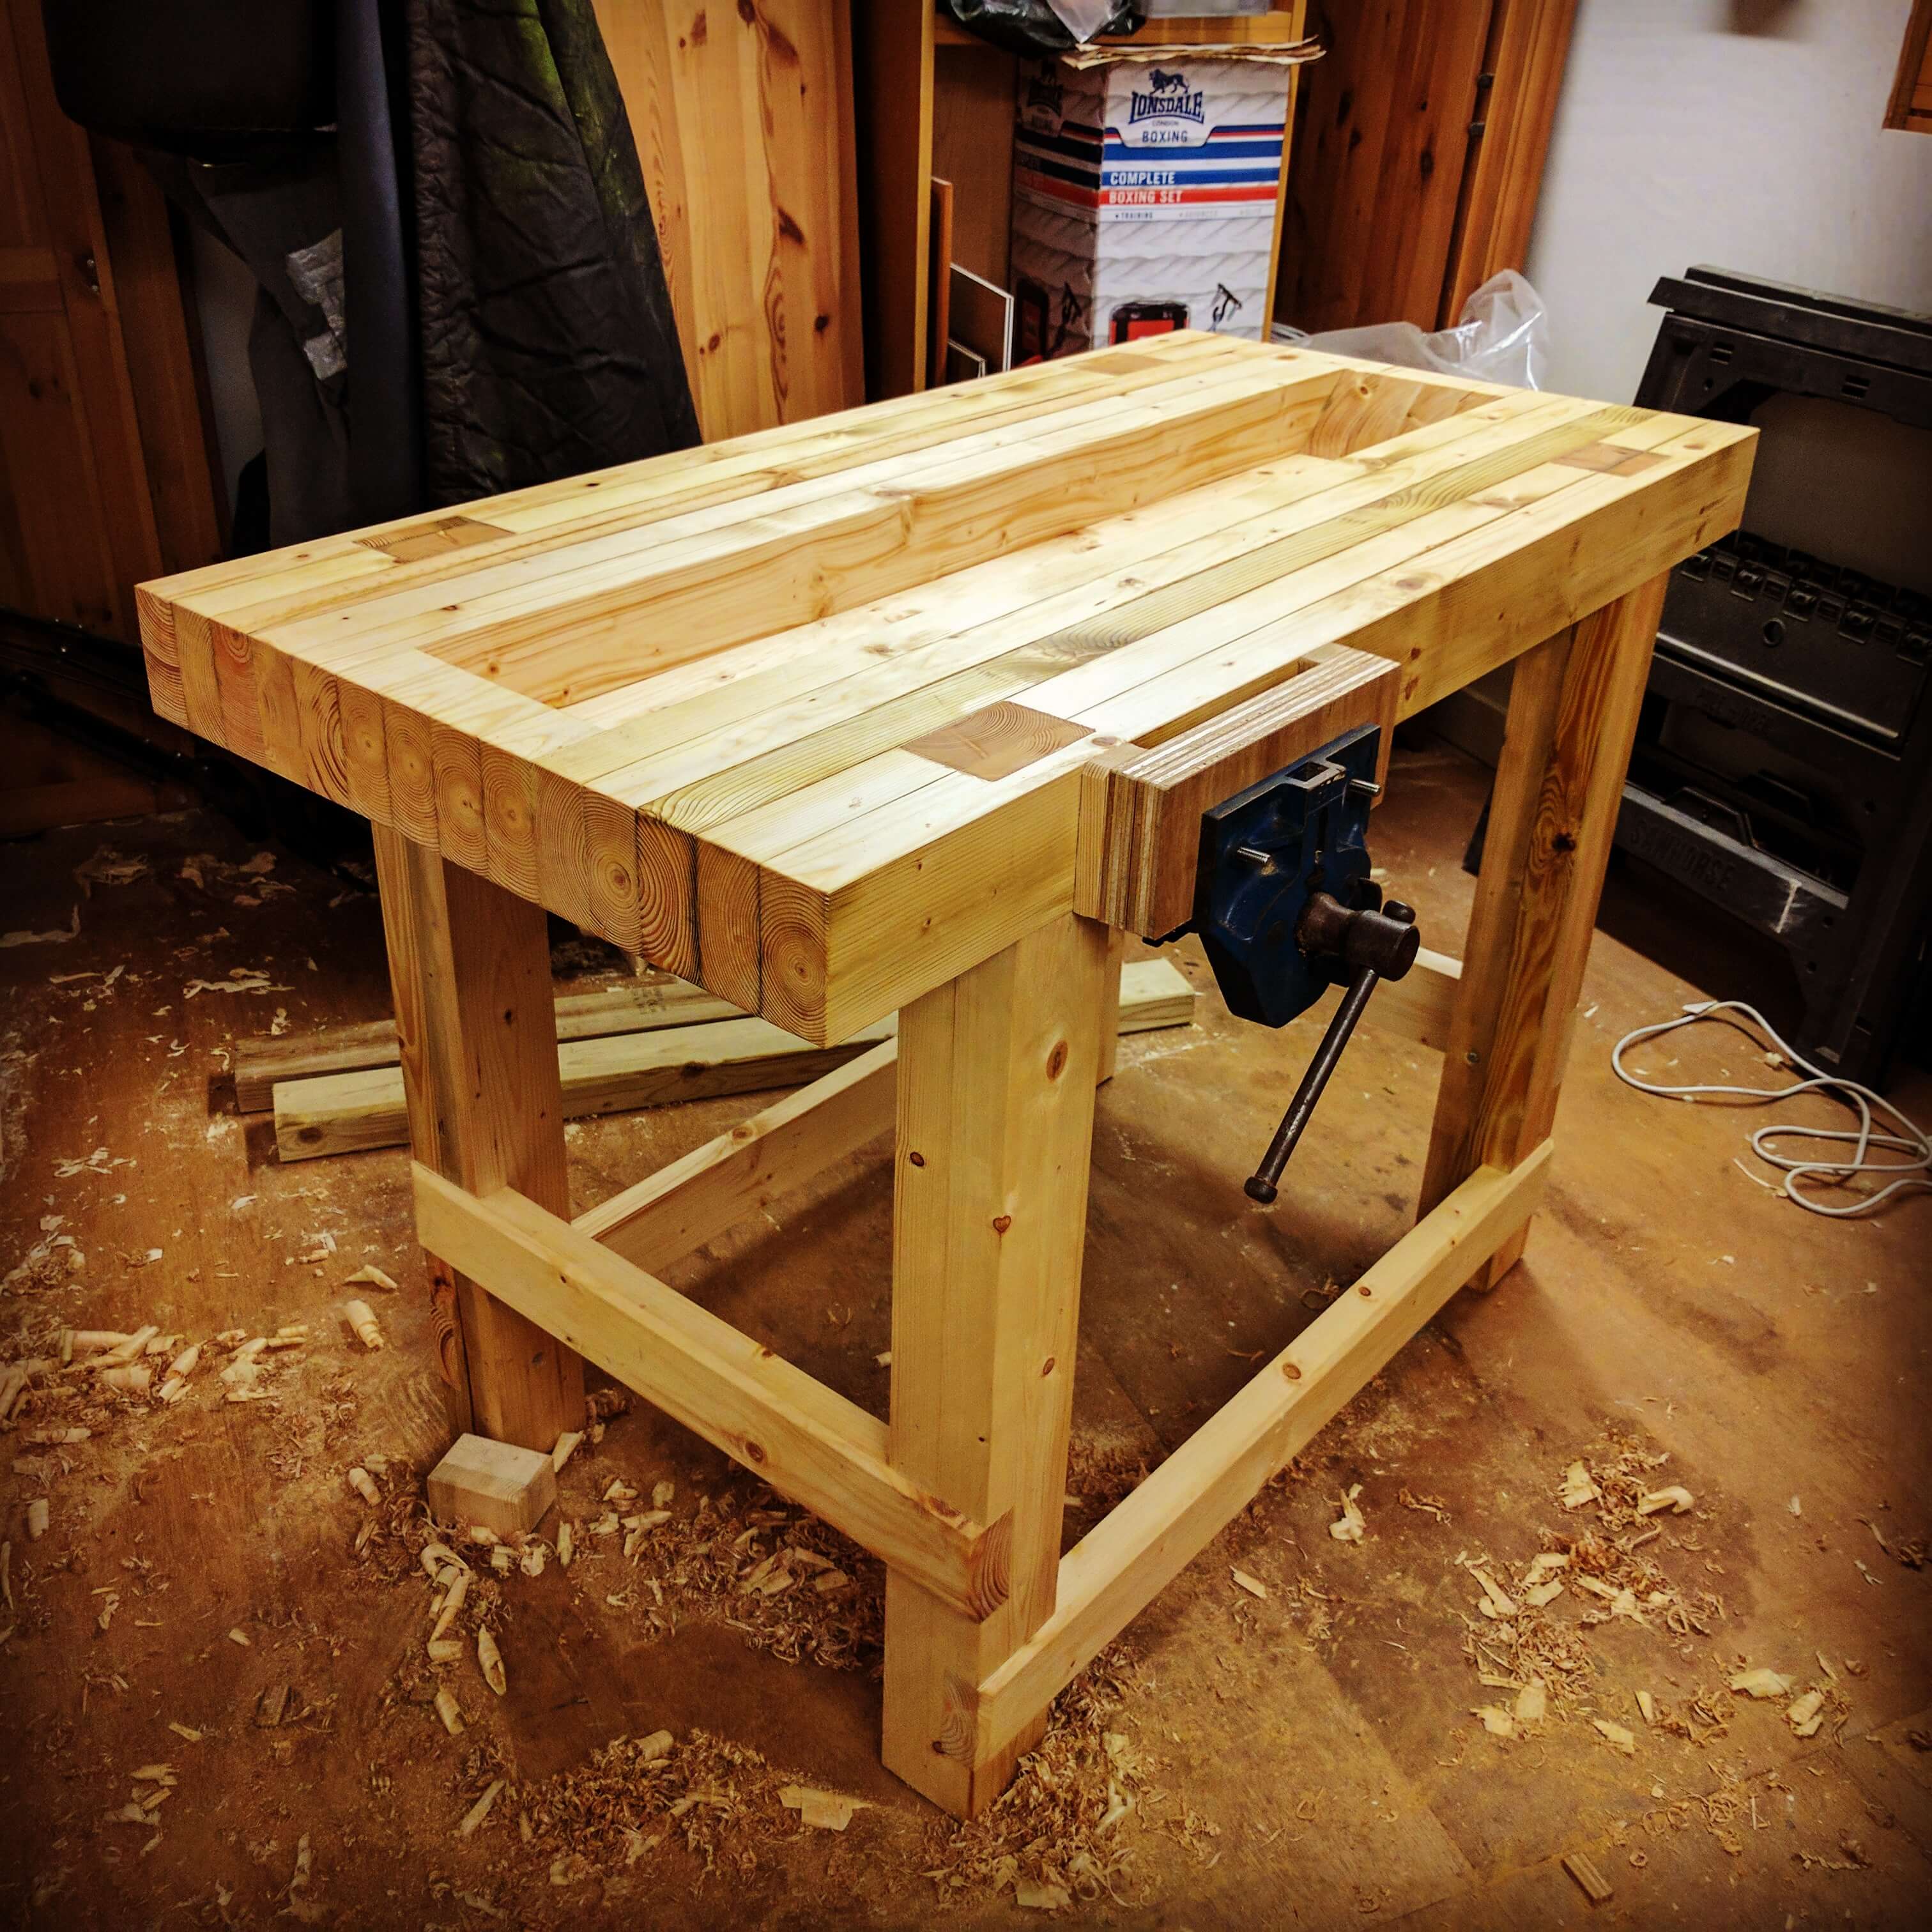 Jay bates woodworking bench plans